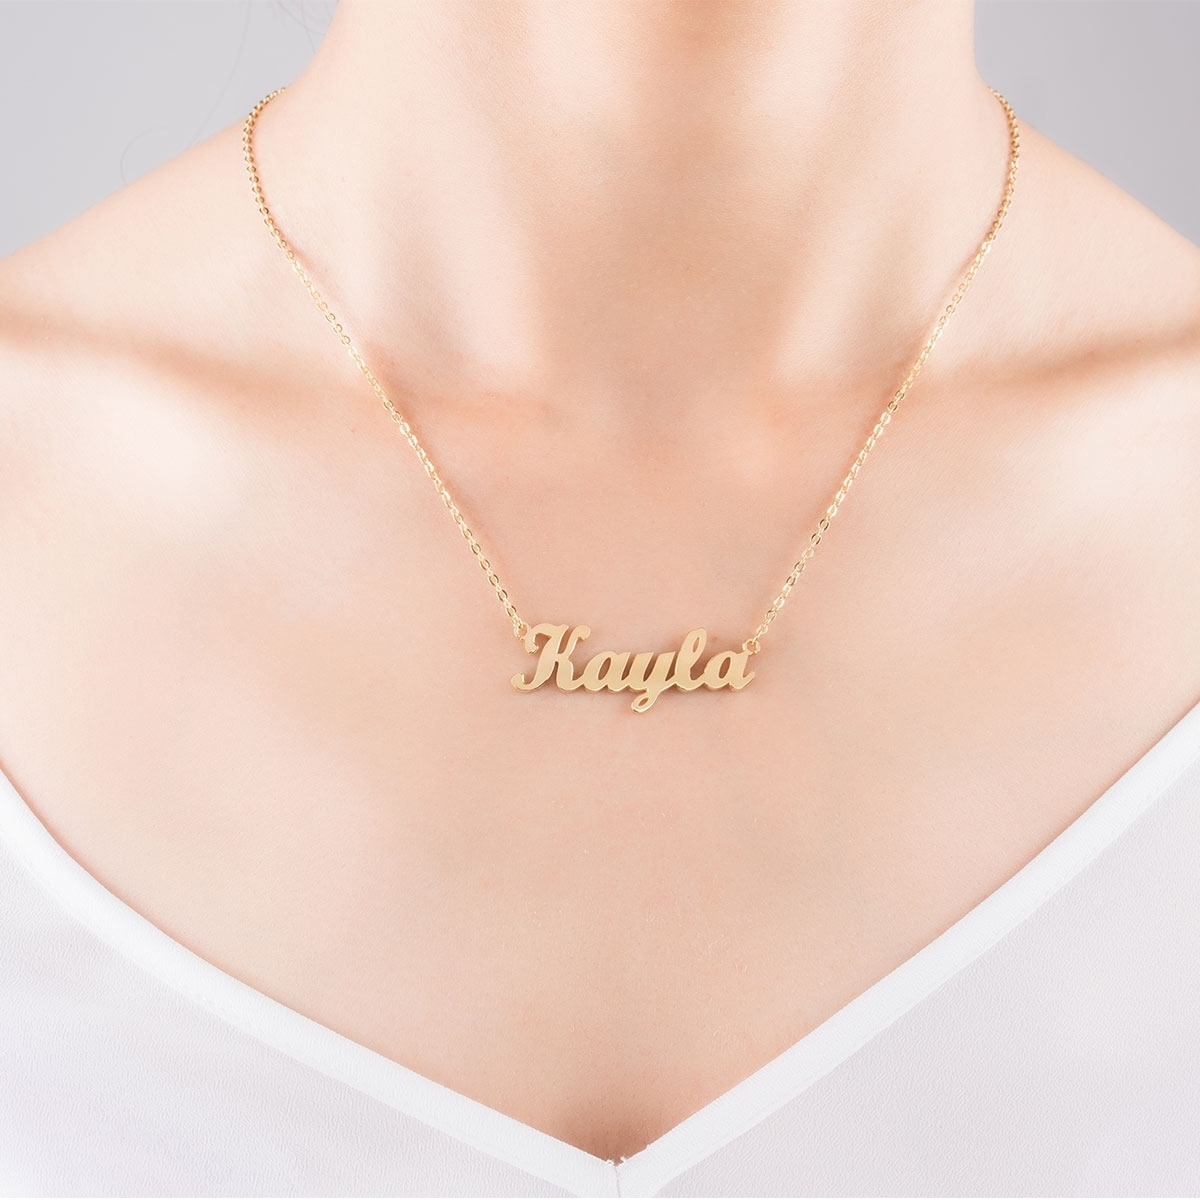 Collar con nombre personalizado con piedra de circón brillante -  Personalized Gifts & Engraved Gifts for Any Occasions from Justyling